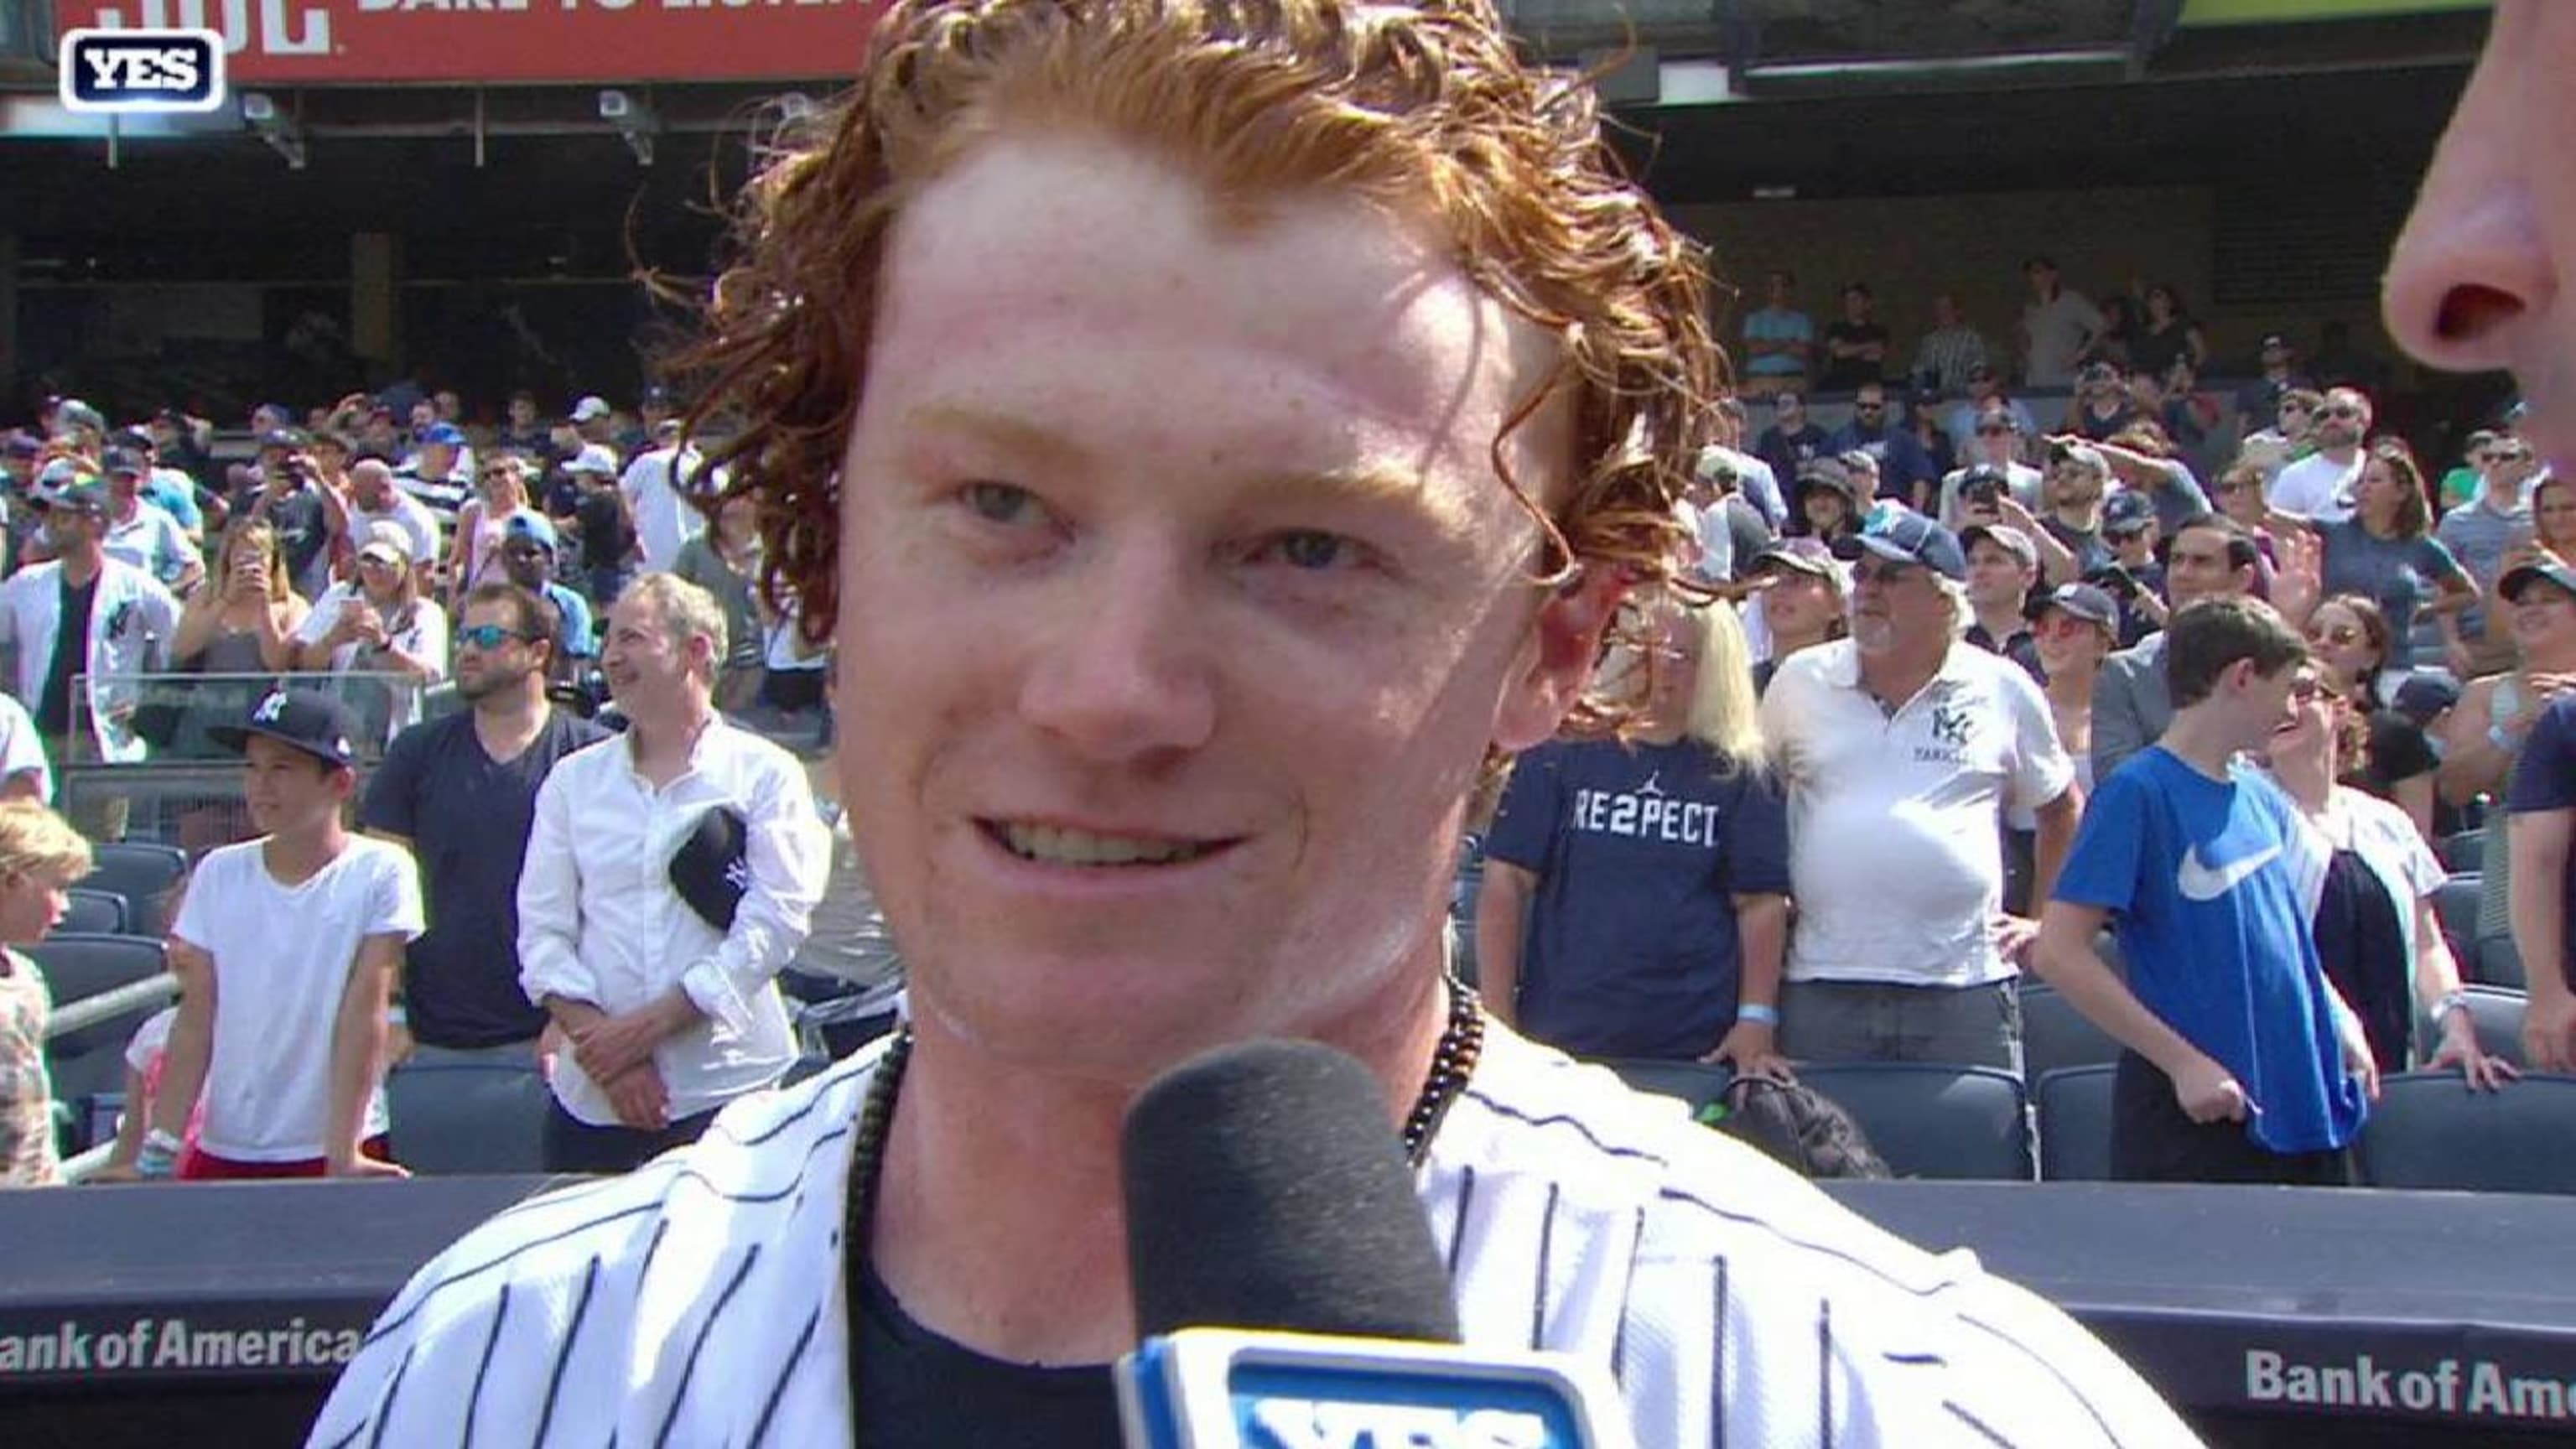 New York Yankees: Clint Frazier walk-off home run was years in the making -  Sports Illustrated NY Yankees News, Analysis and More